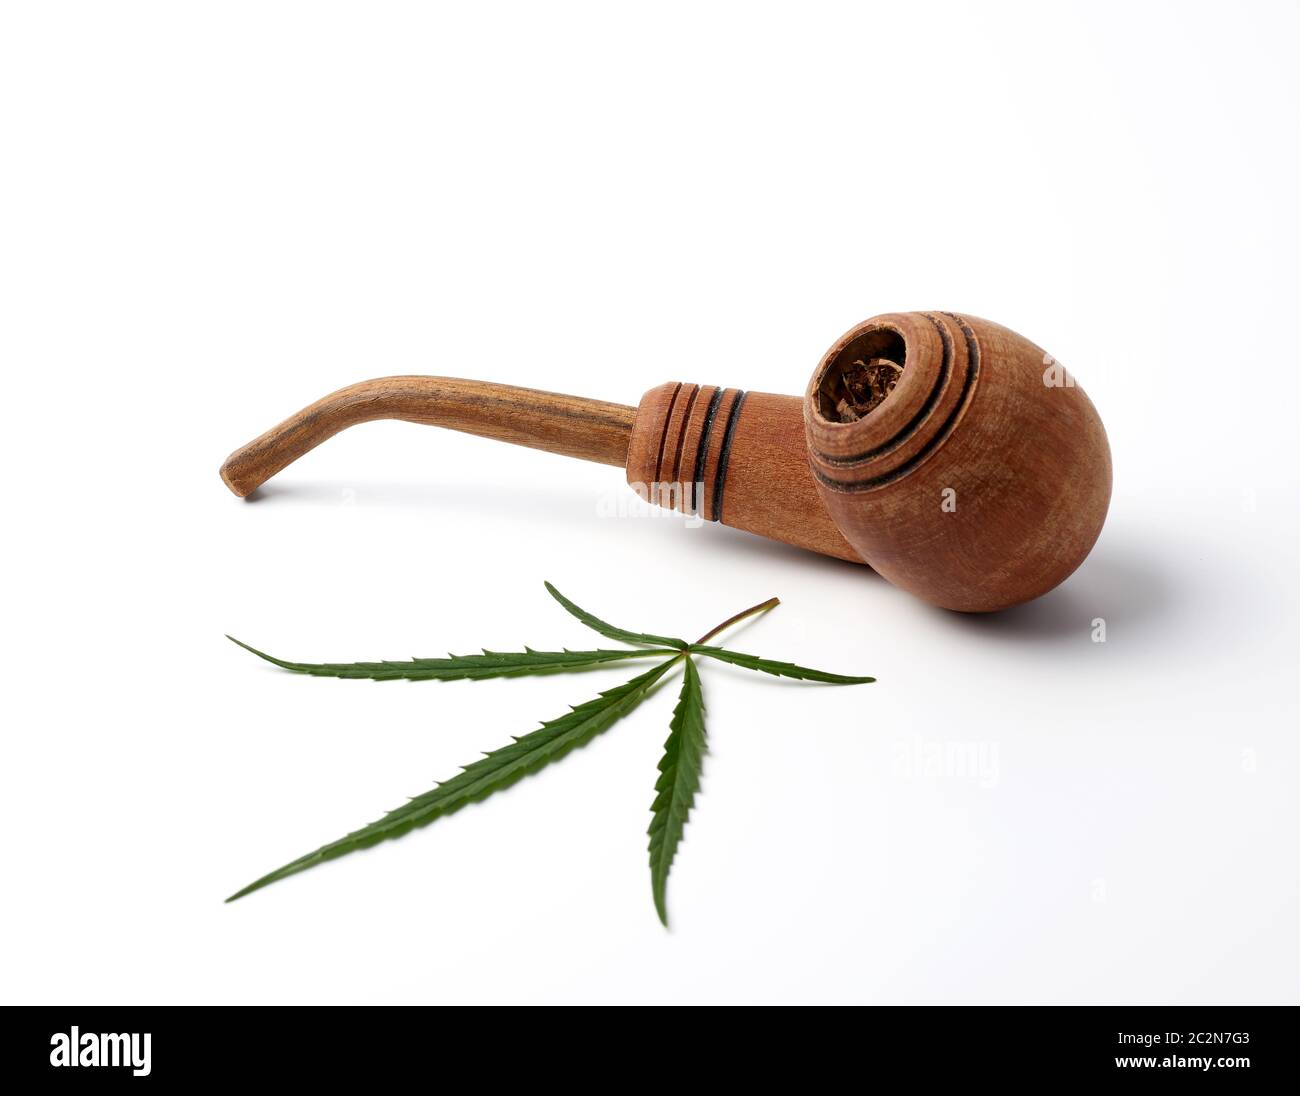 https://c8.alamy.com/comp/2C2N7G3/wooden-smoking-pipe-and-green-hemp-leaves-on-a-white-background-concept-of-legalization-of-marijuana-for-alternative-medicine-2C2N7G3.jpg